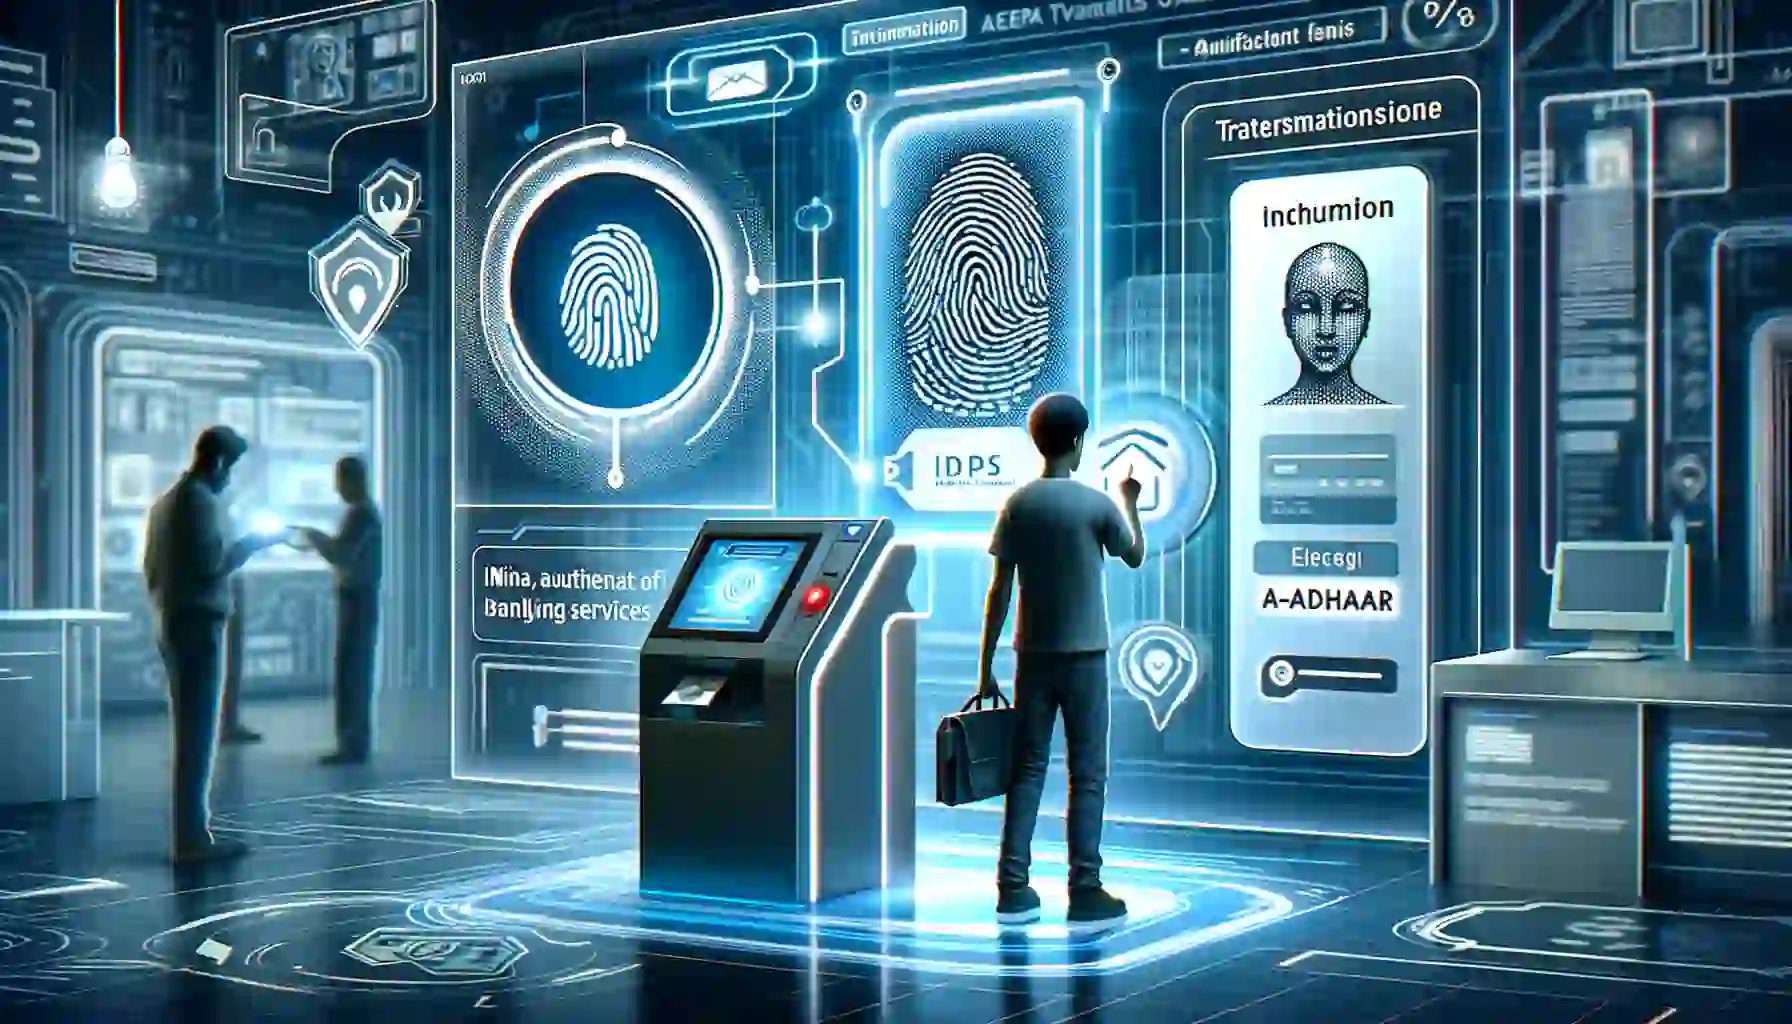 An illustration depicting a person conducting AEPS Offus transactions at a digital kiosk